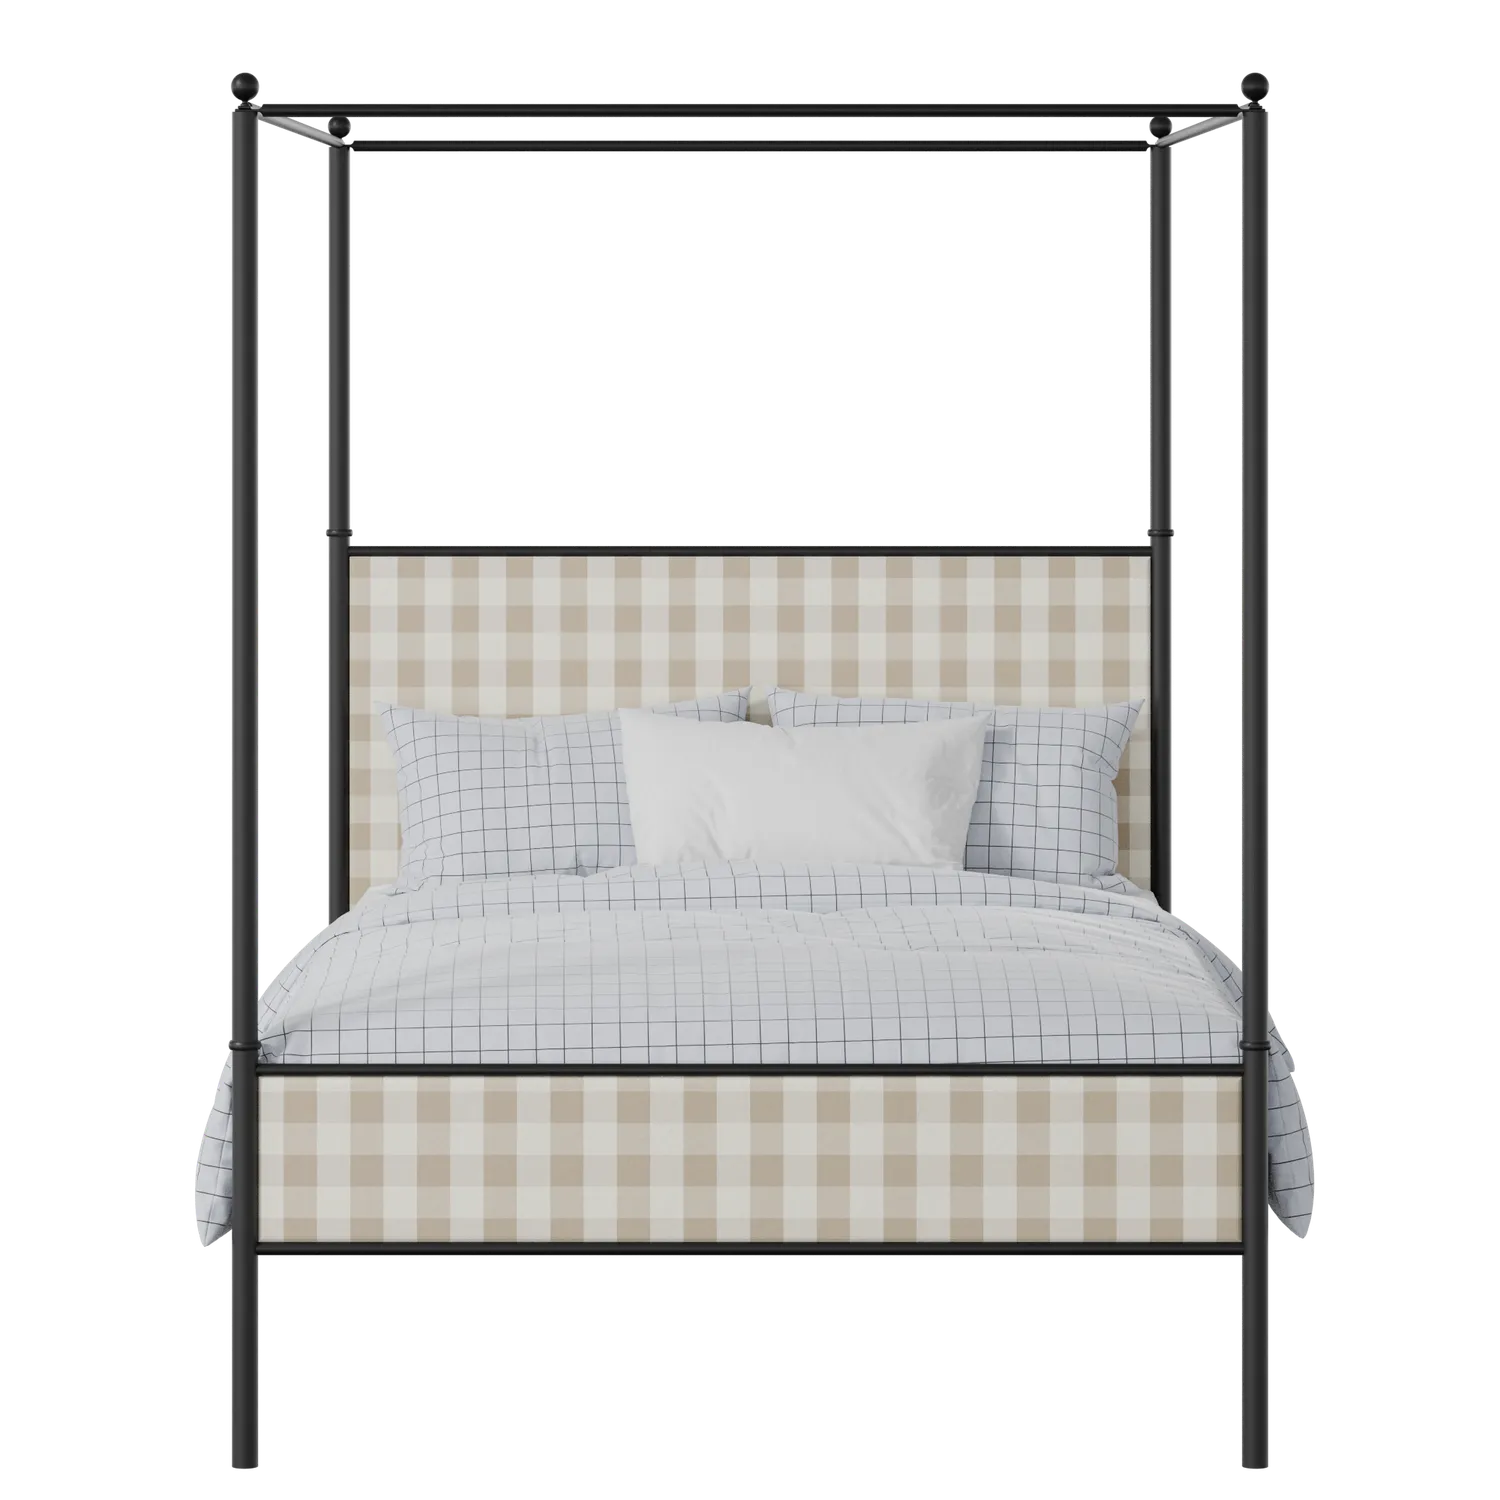 Reims Slim iron/metal upholstered bed in black with Romo Kemble Putty fabric